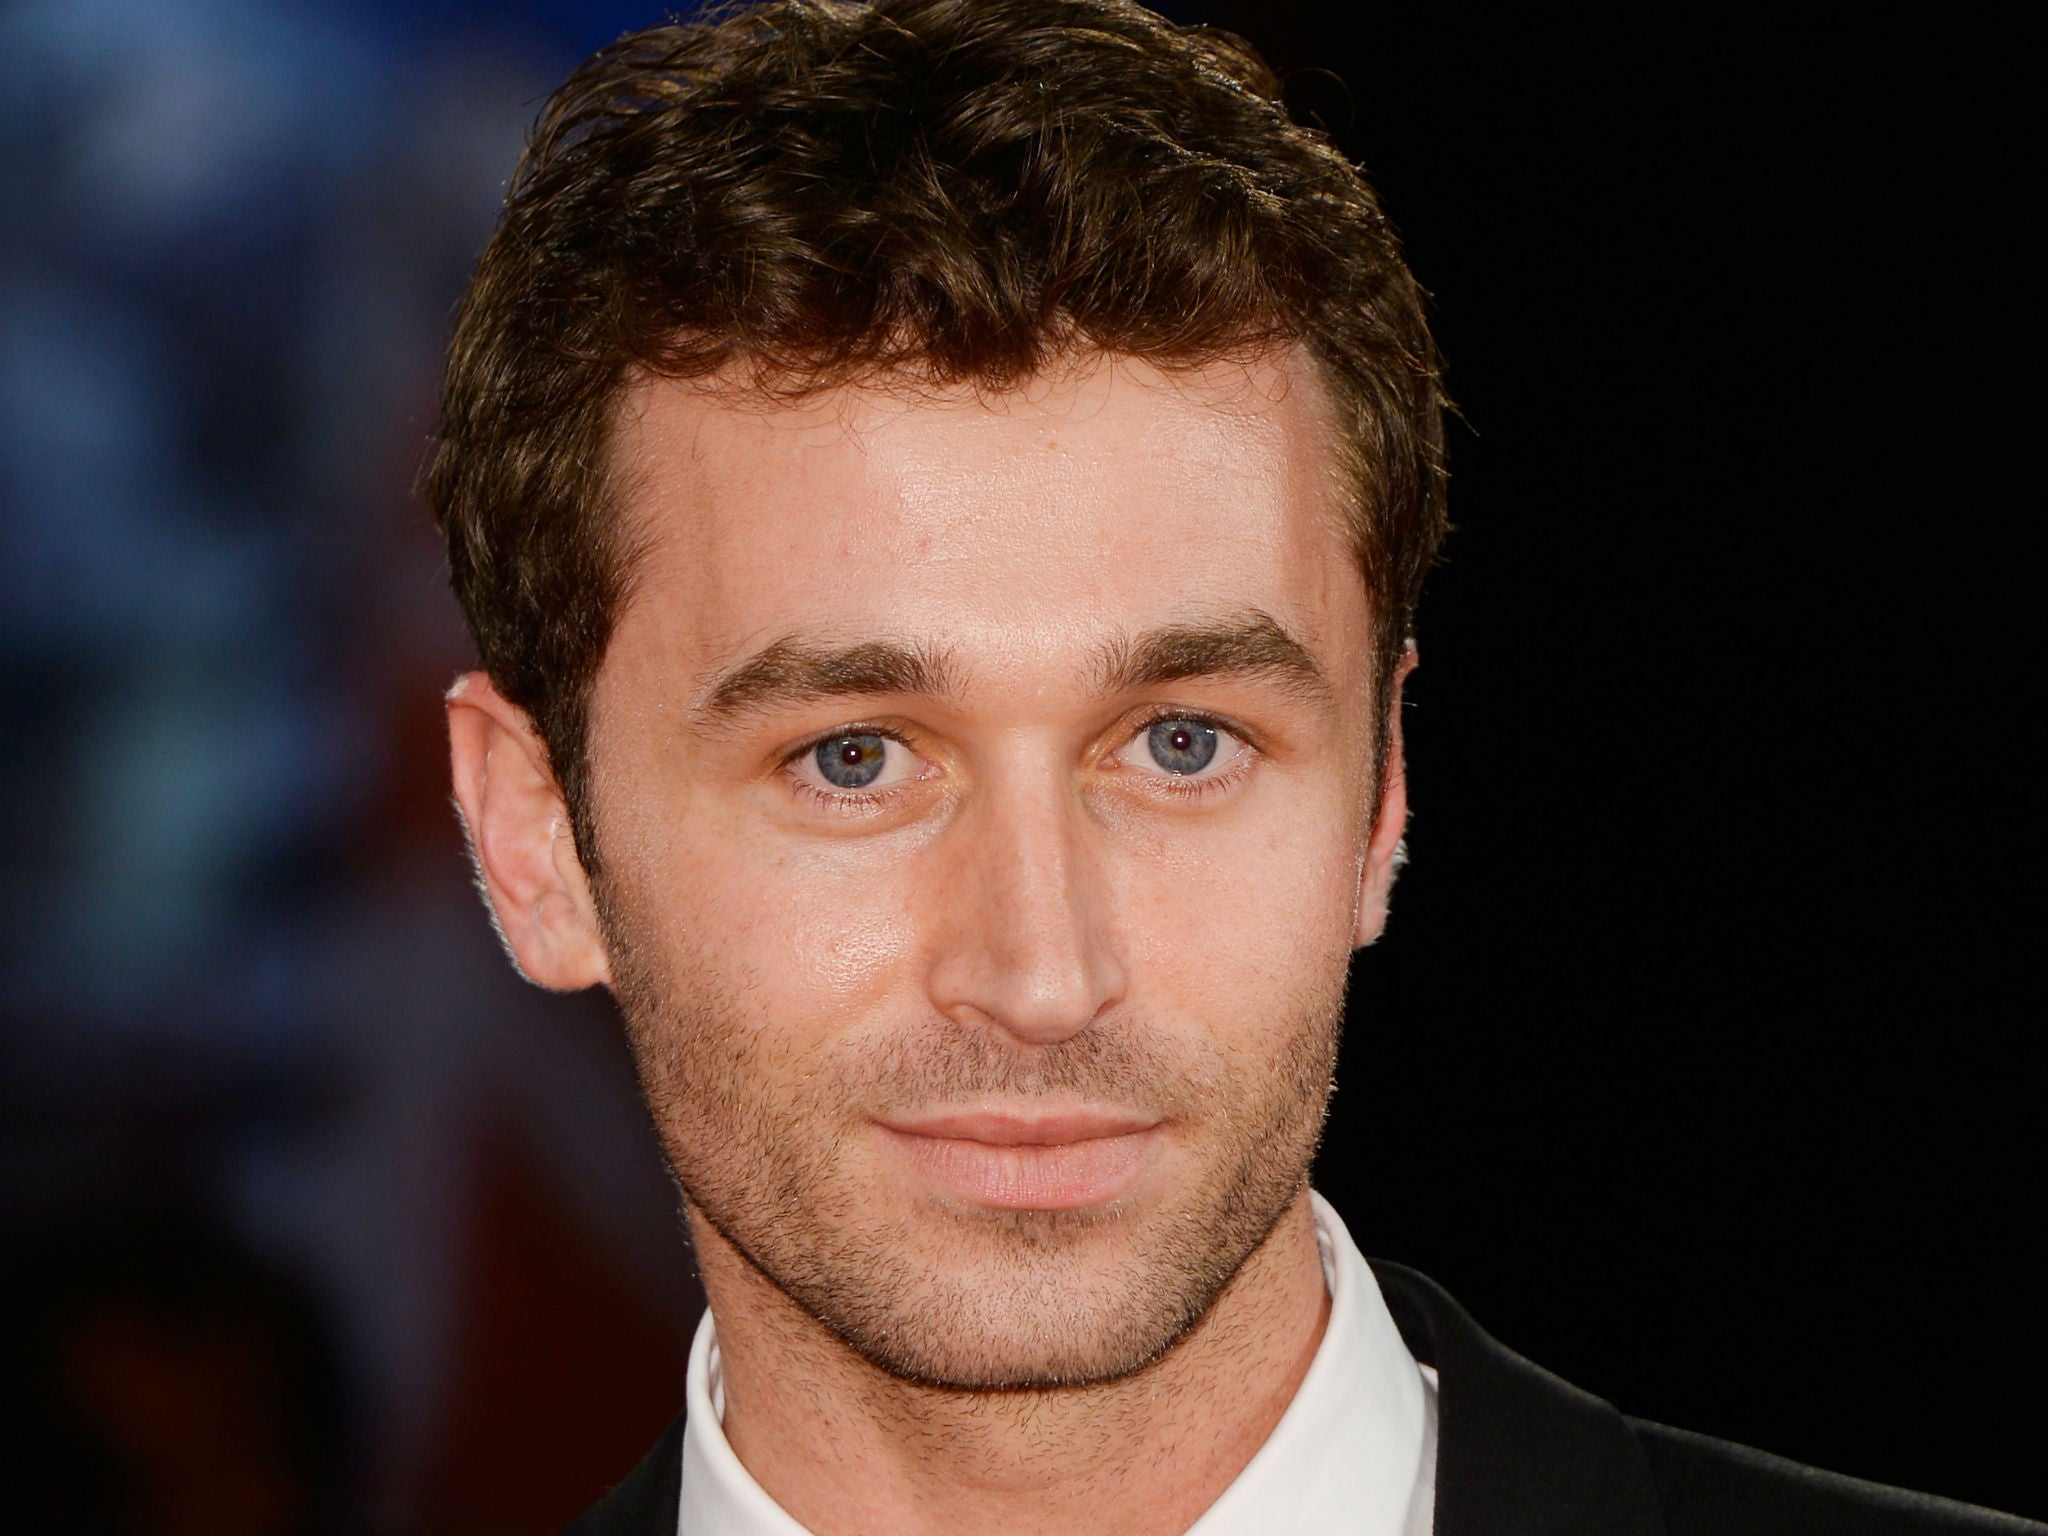 James Deen Rough Sex Porn - James Deen: Porn actor 'baffled' by rape claims and issues ...